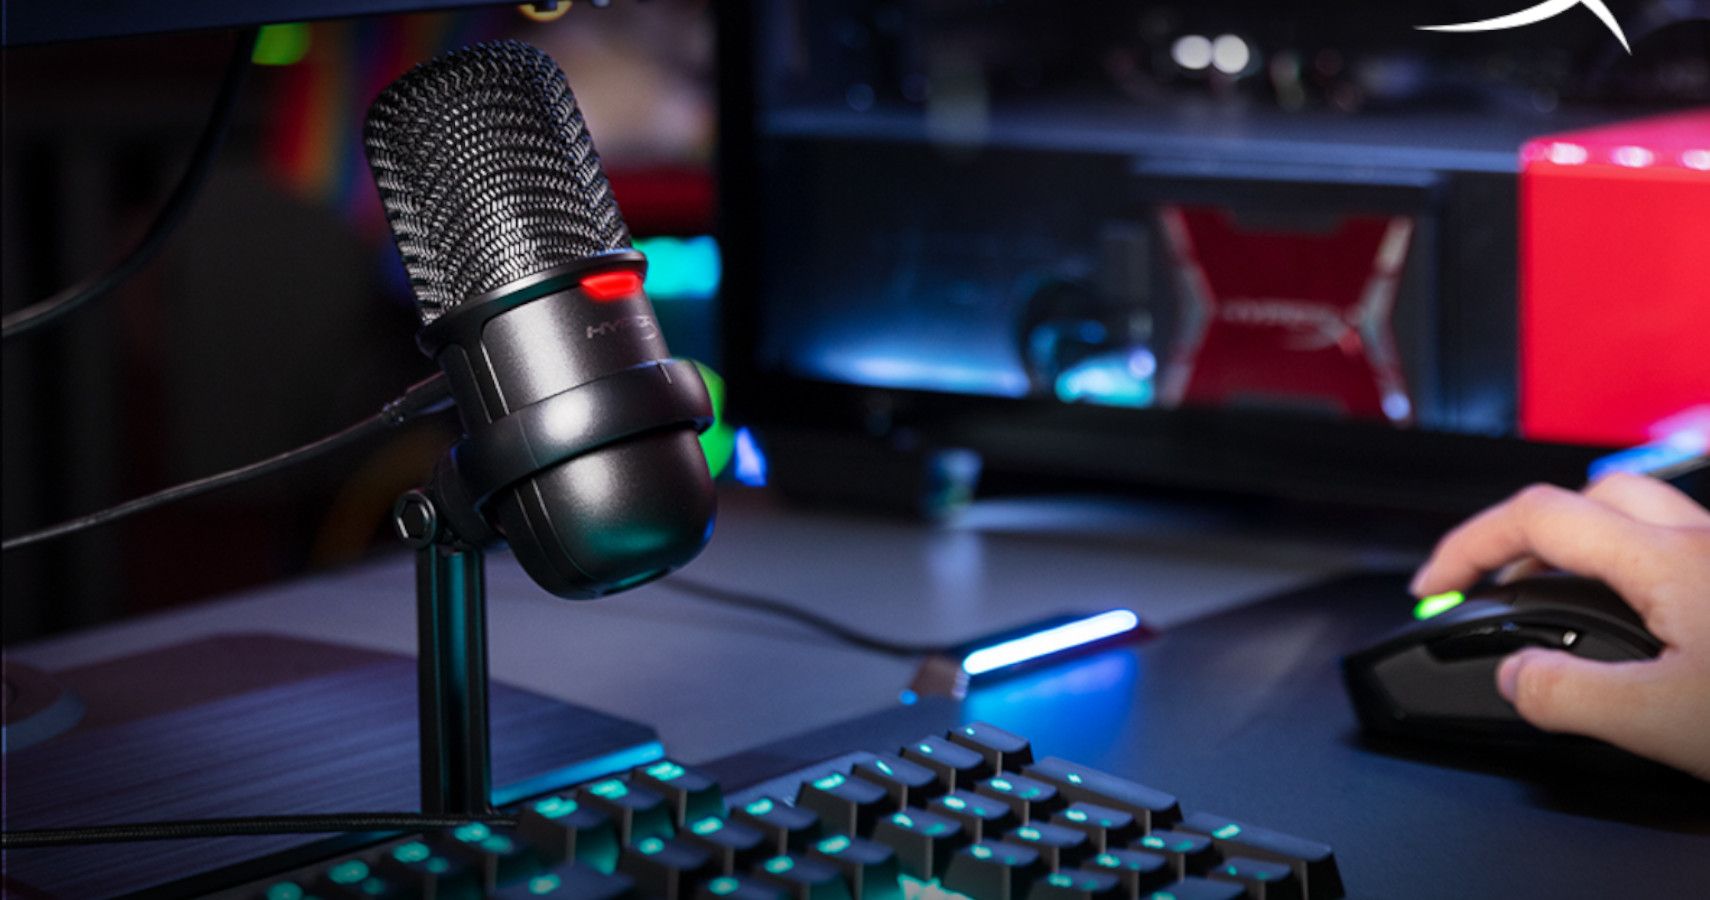 Microphones - Microphones for gaming, podcasts, streaming – HyperX